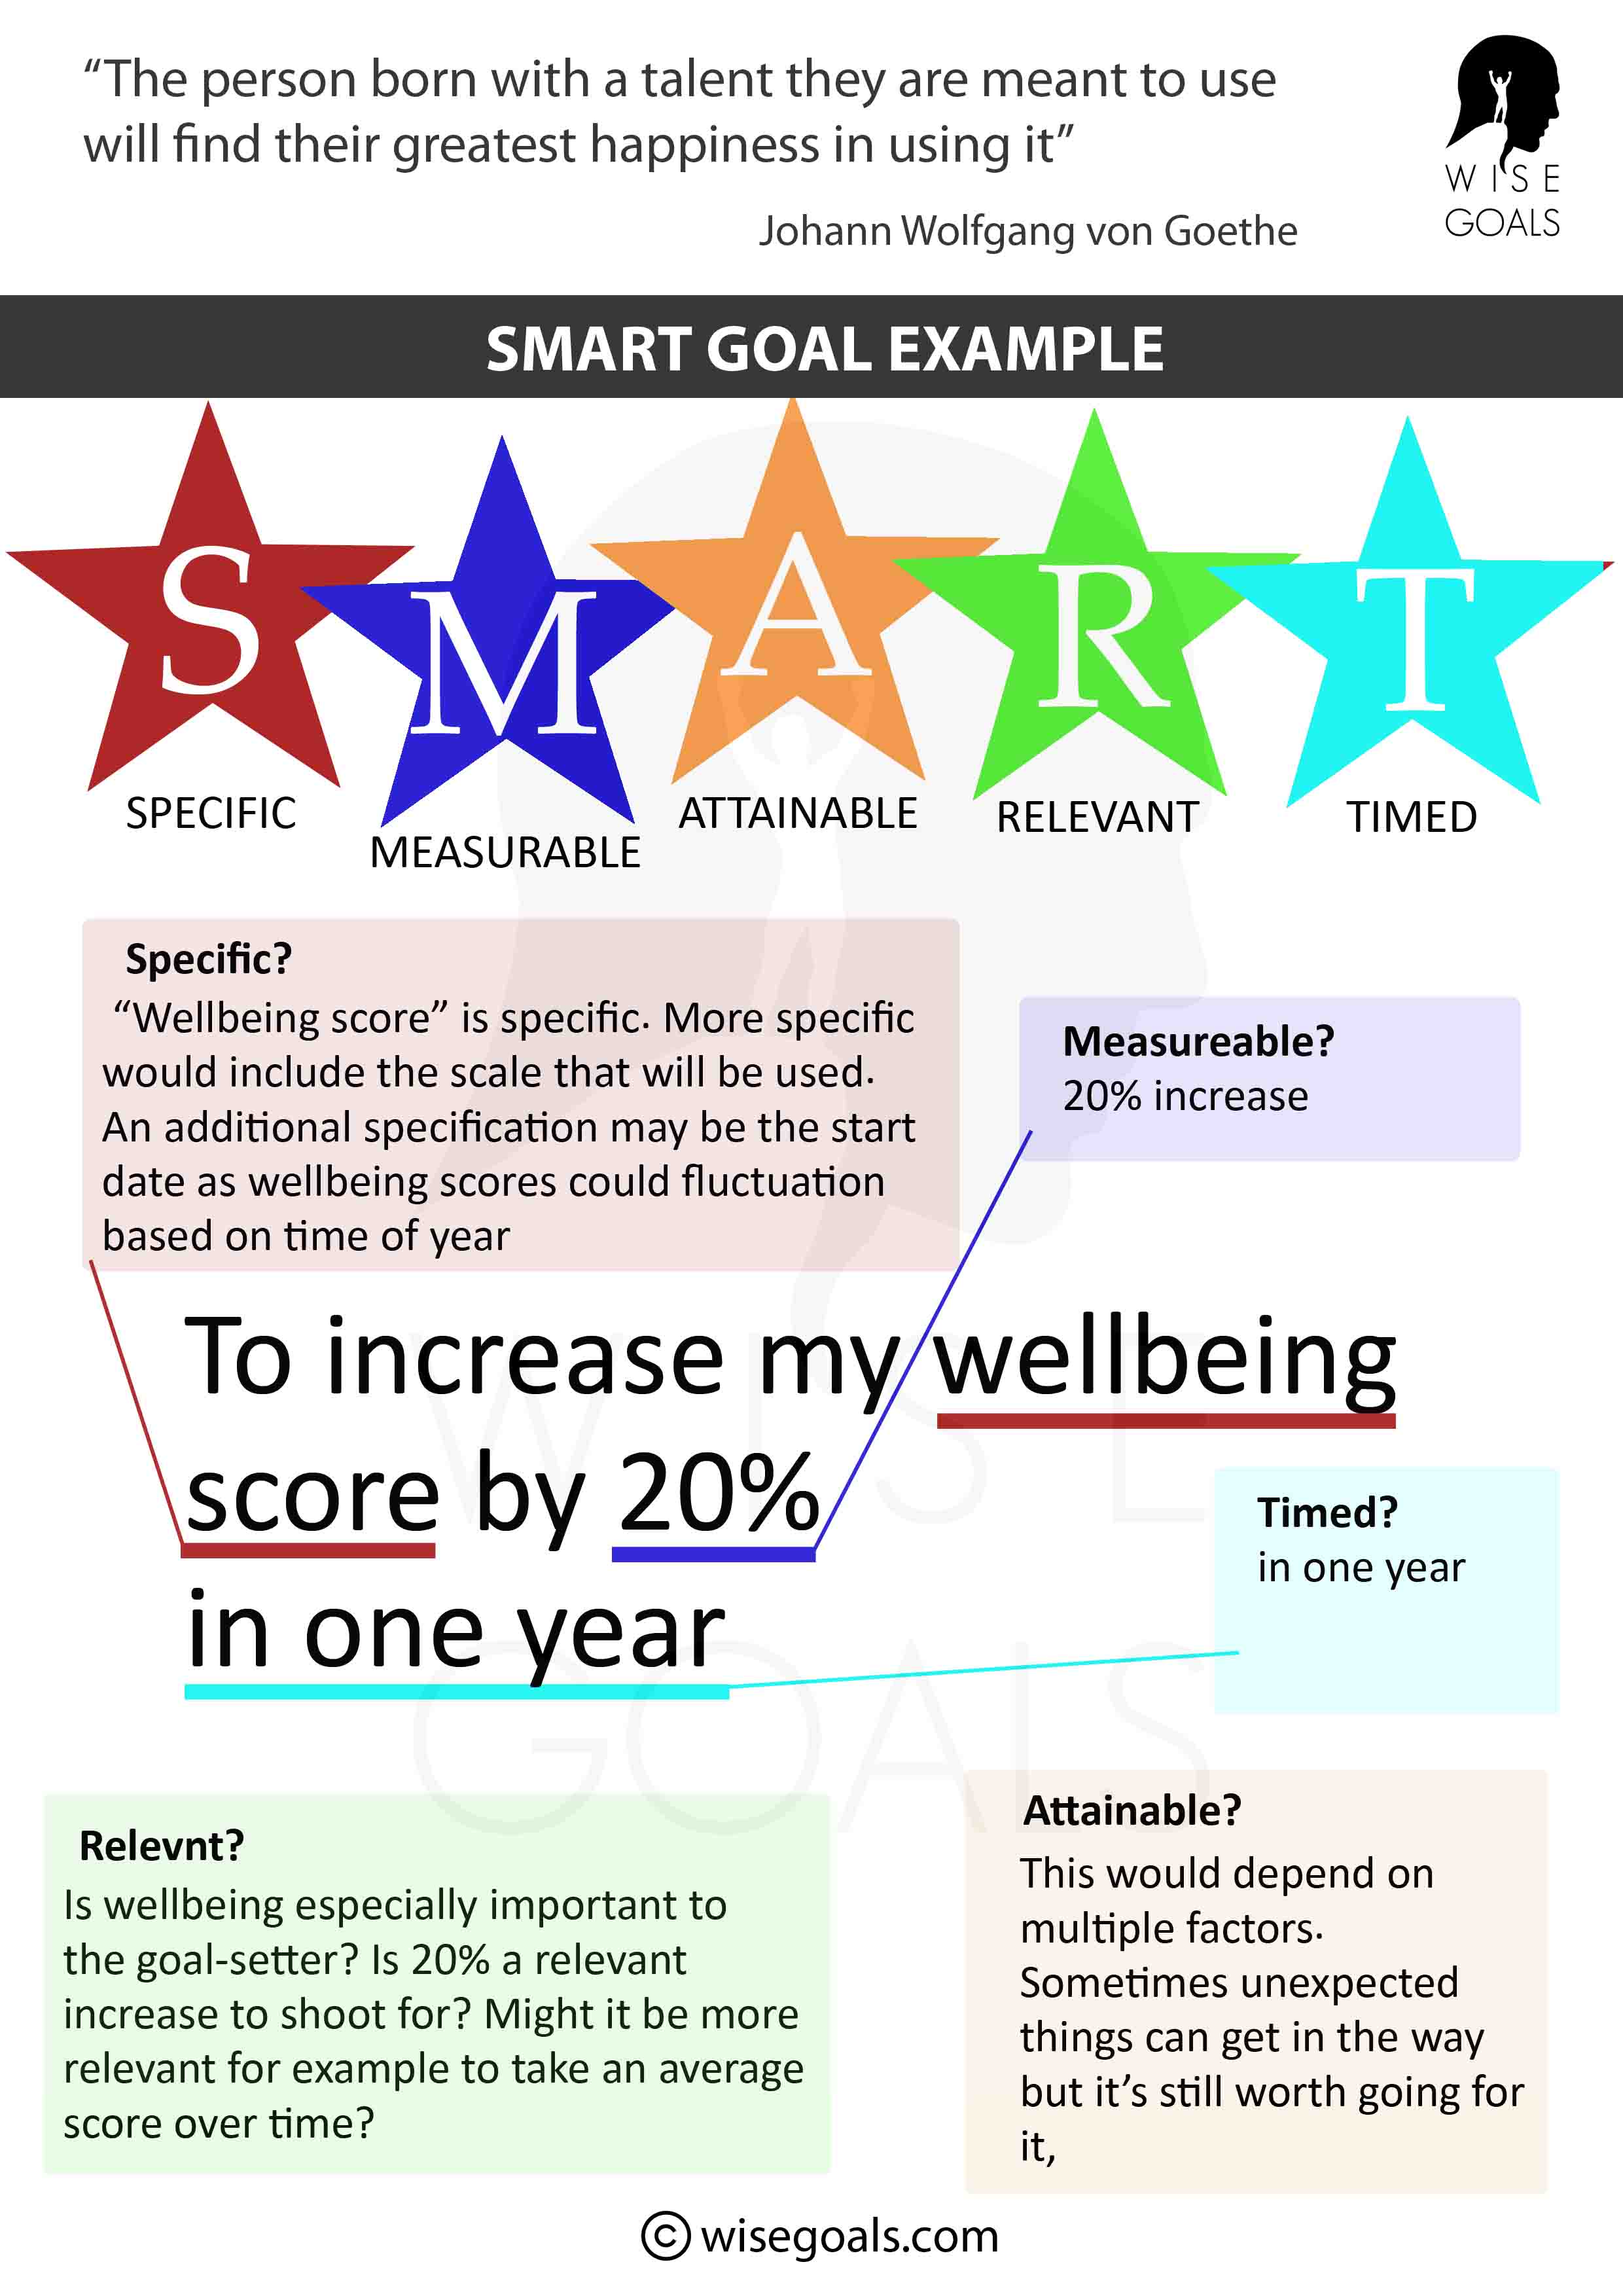 Smart goal example: Happiness/Wellbeing